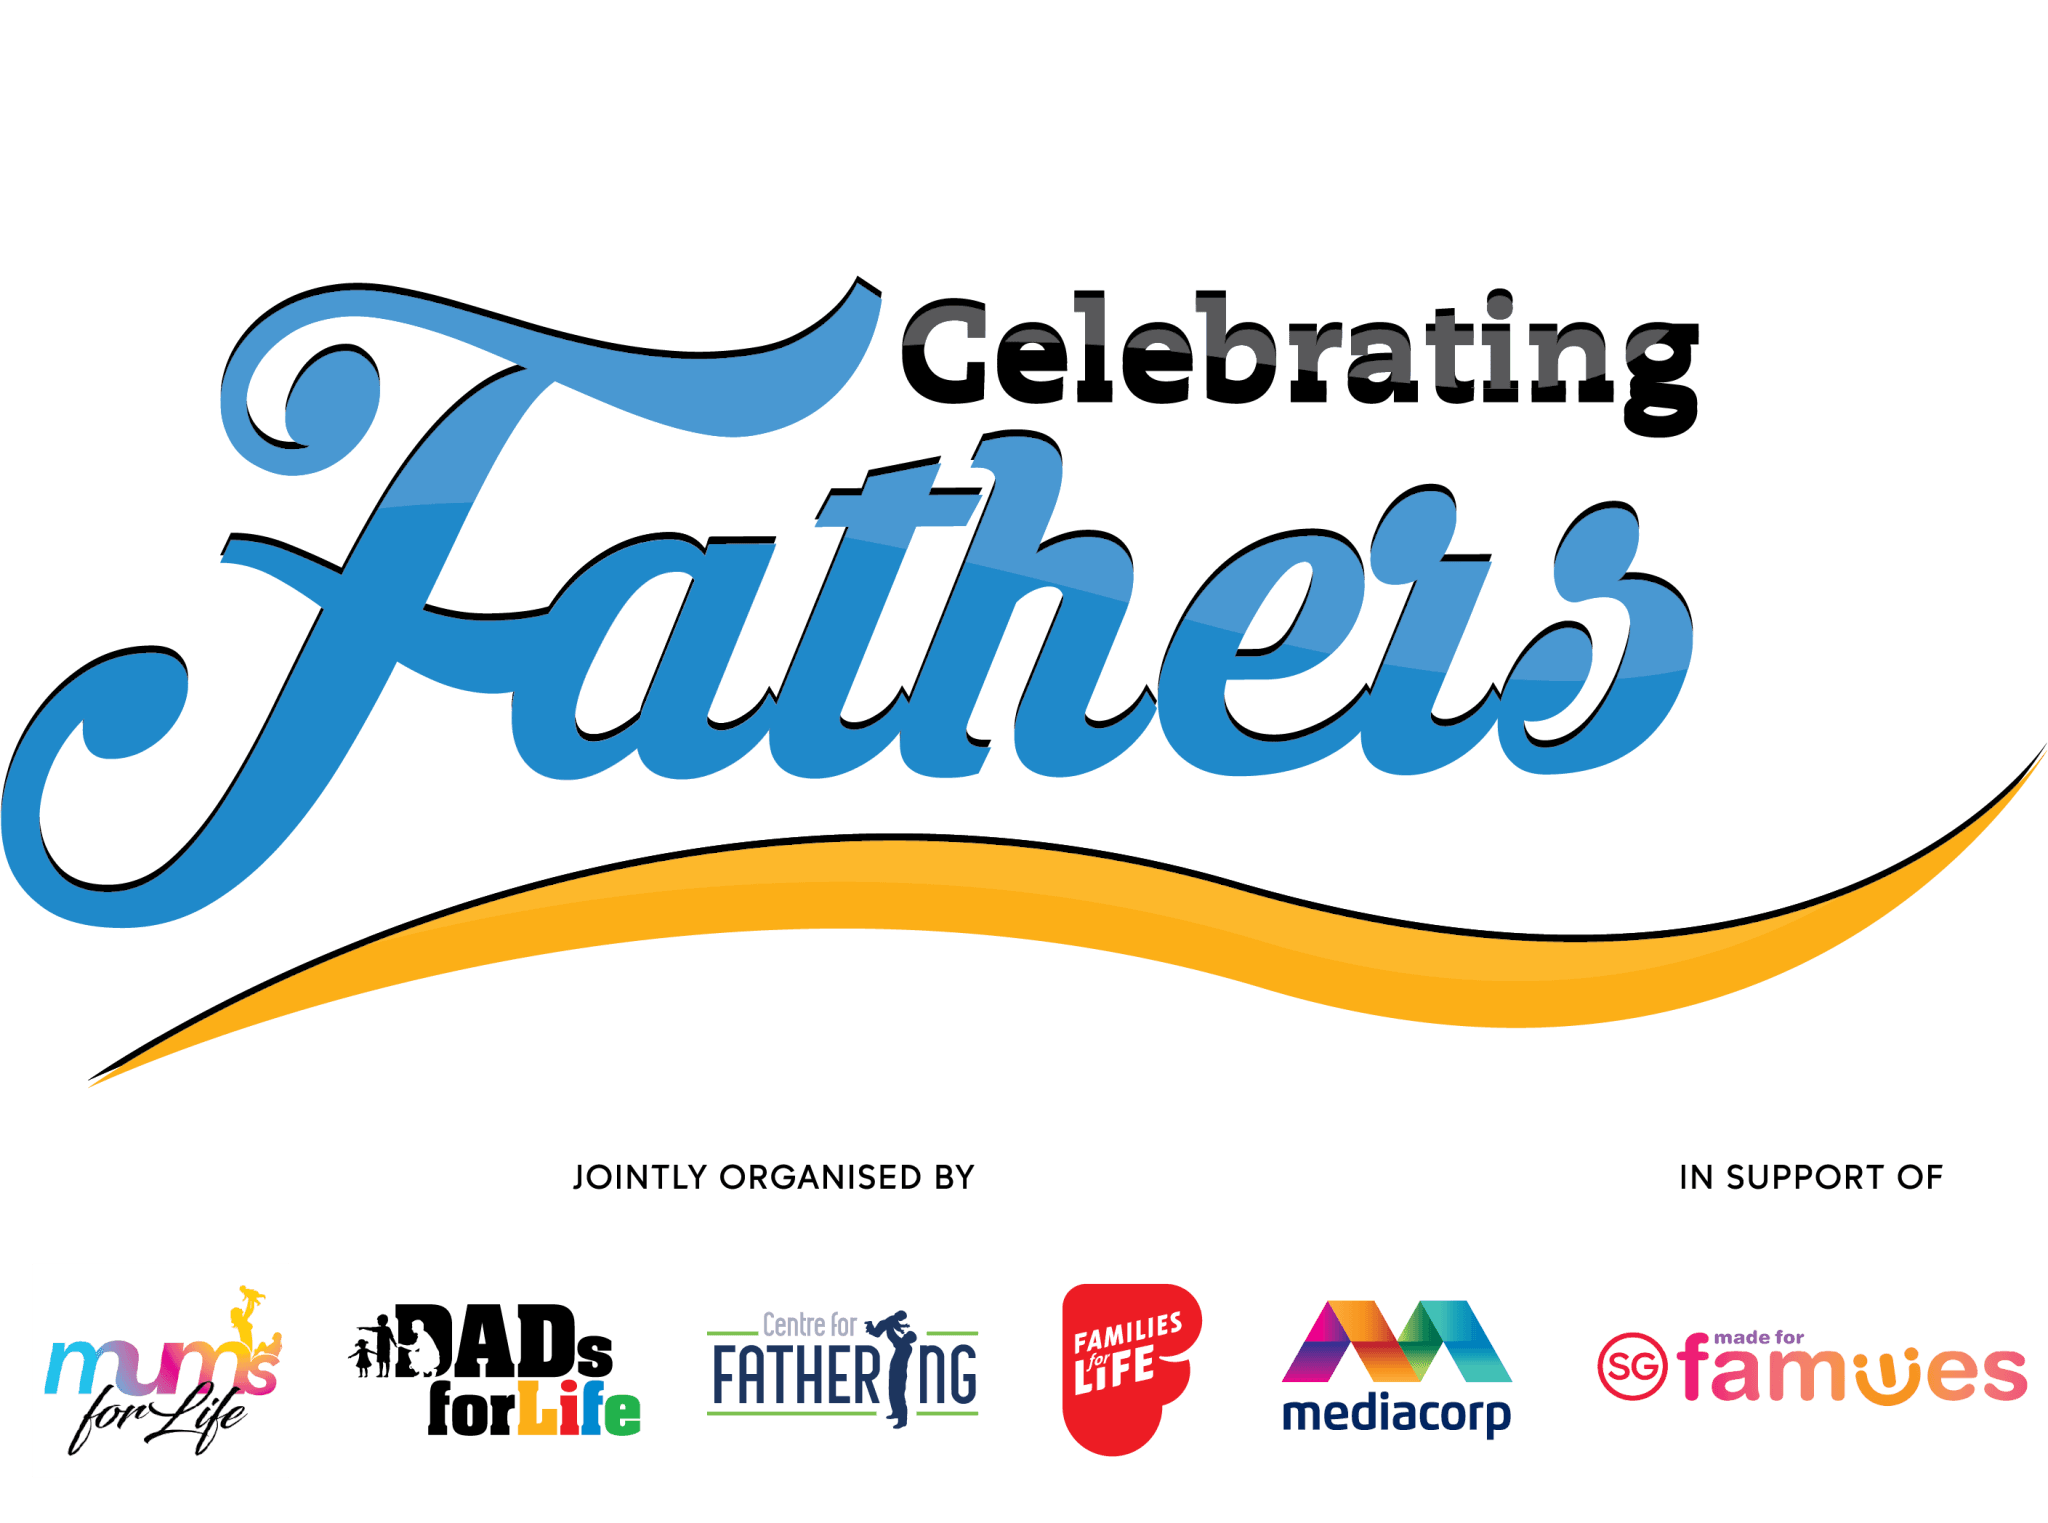 Centre for Fathering Ltd